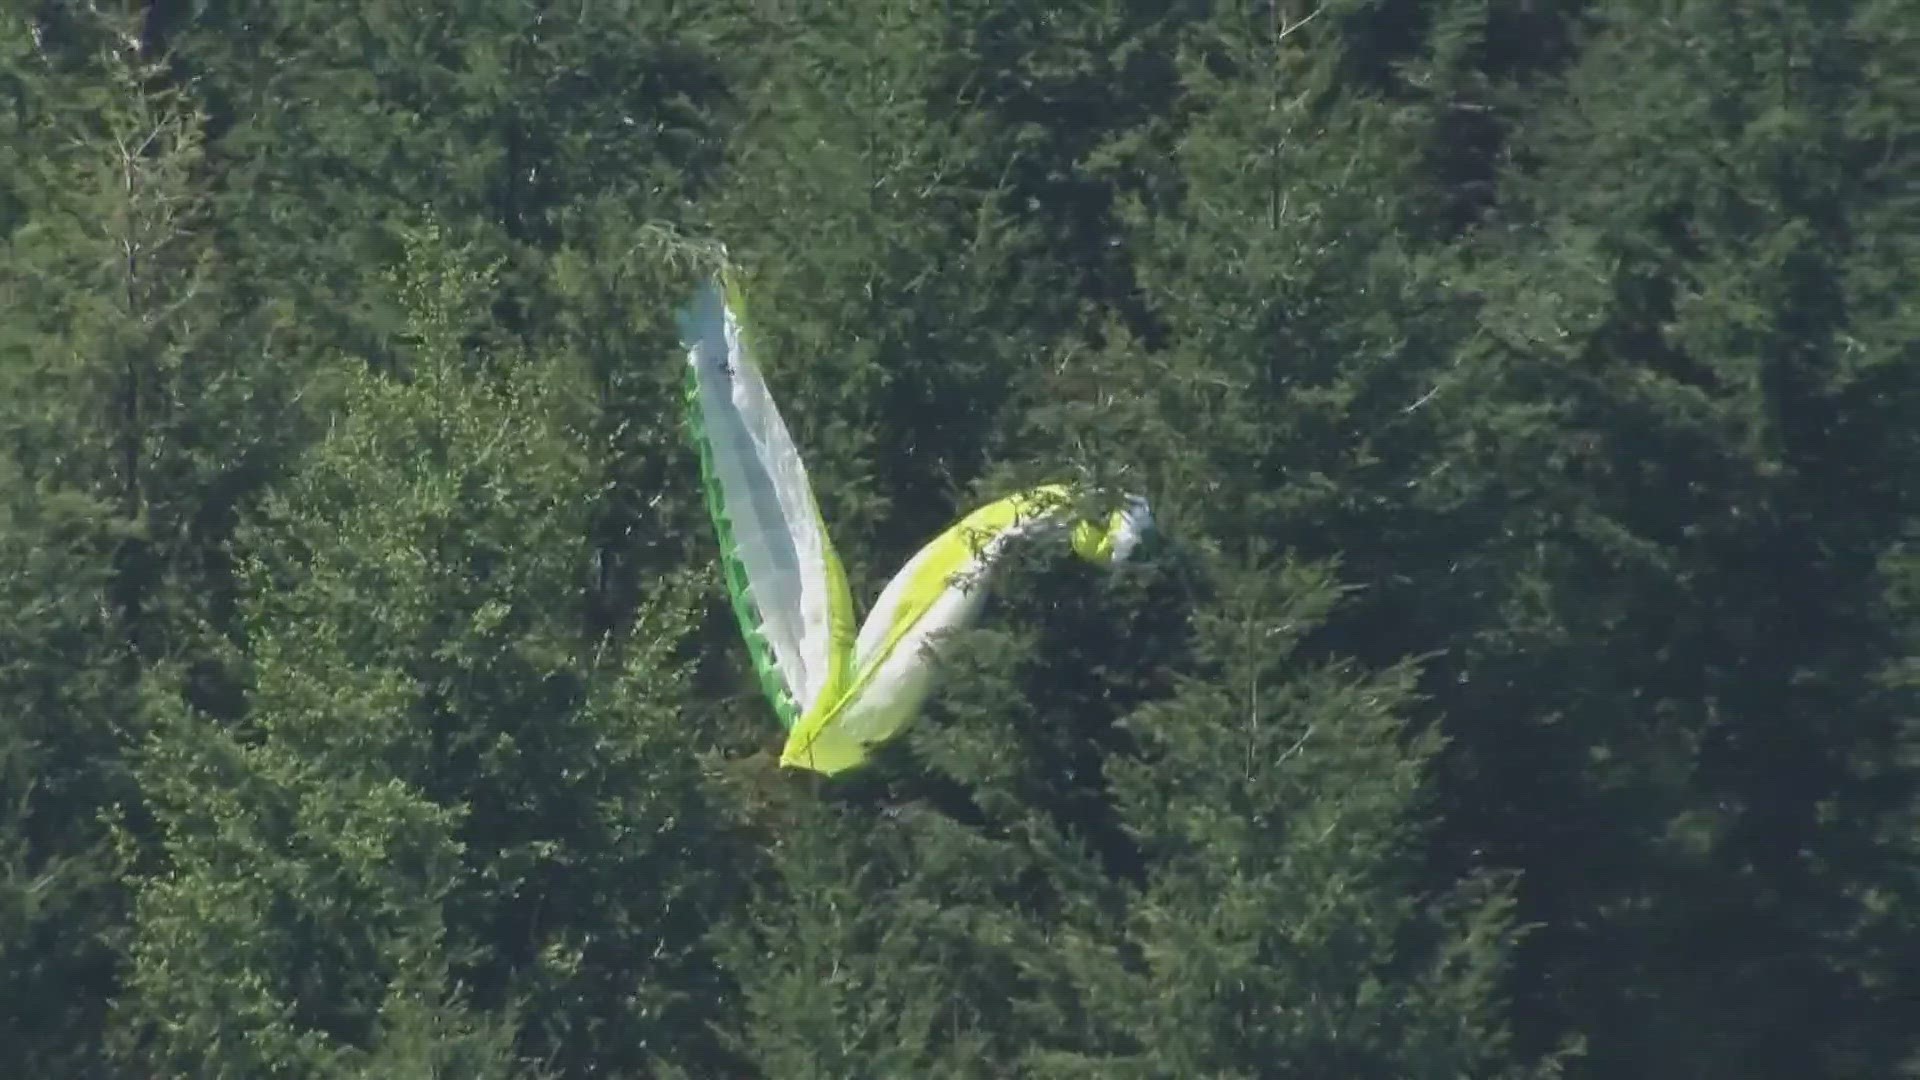 The paraglider was stuck for about an hour and a half and only had minor injuries.